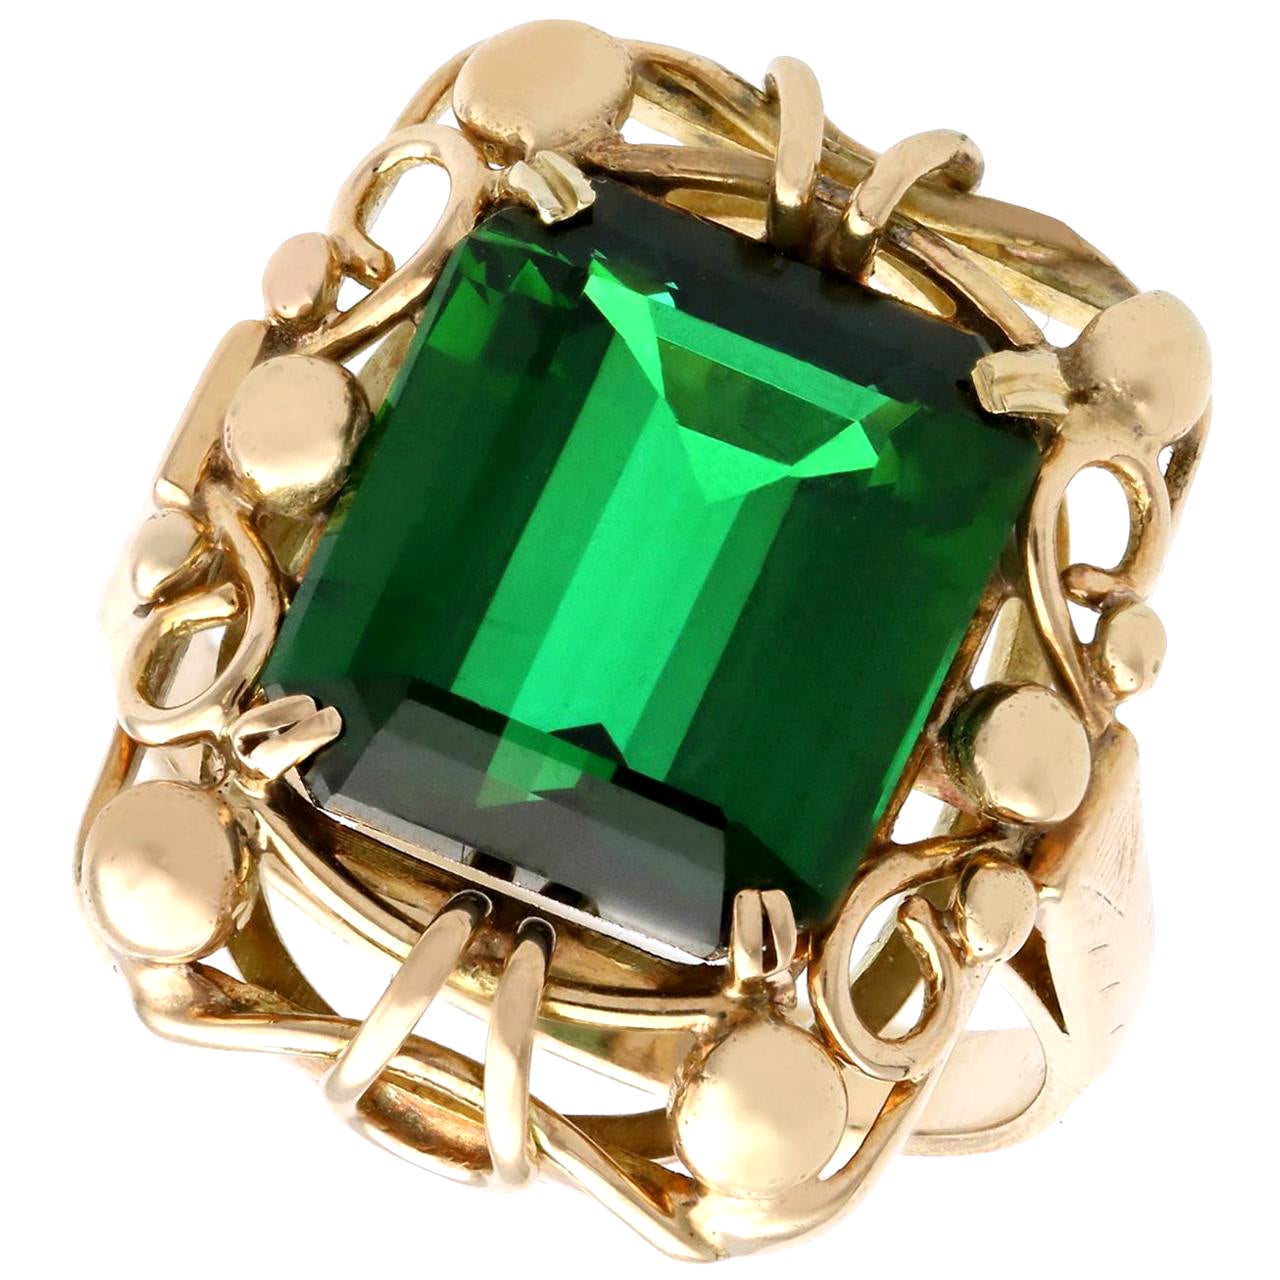 1940s 8.37 Carat Tourmaline and Yellow Gold Cocktail Ring